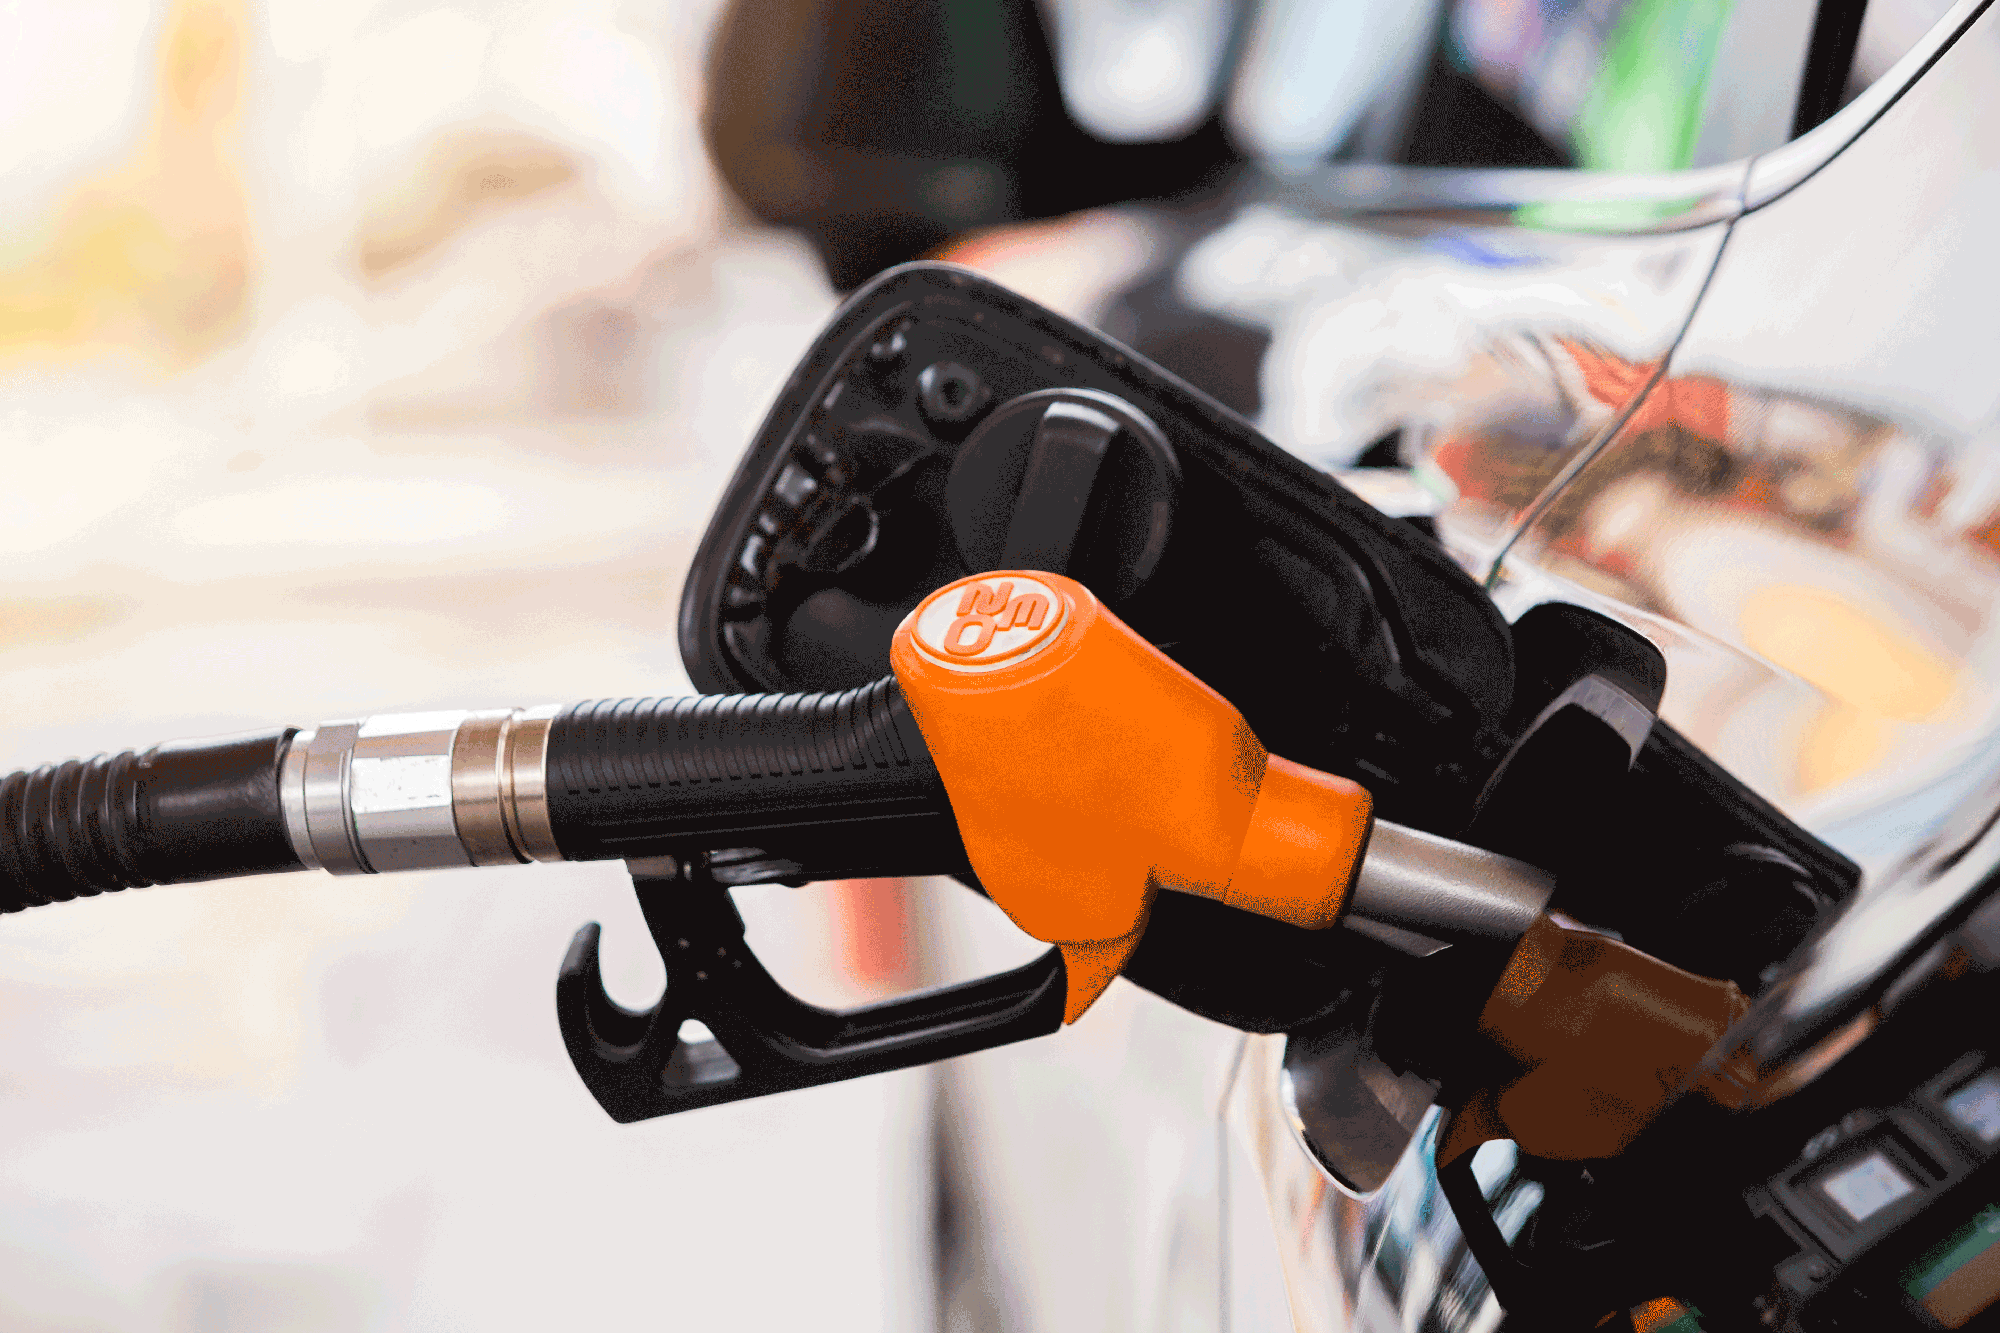 Is E85 Fuel Bad for Your Engine? Discover the Facts and Get the Best Advice